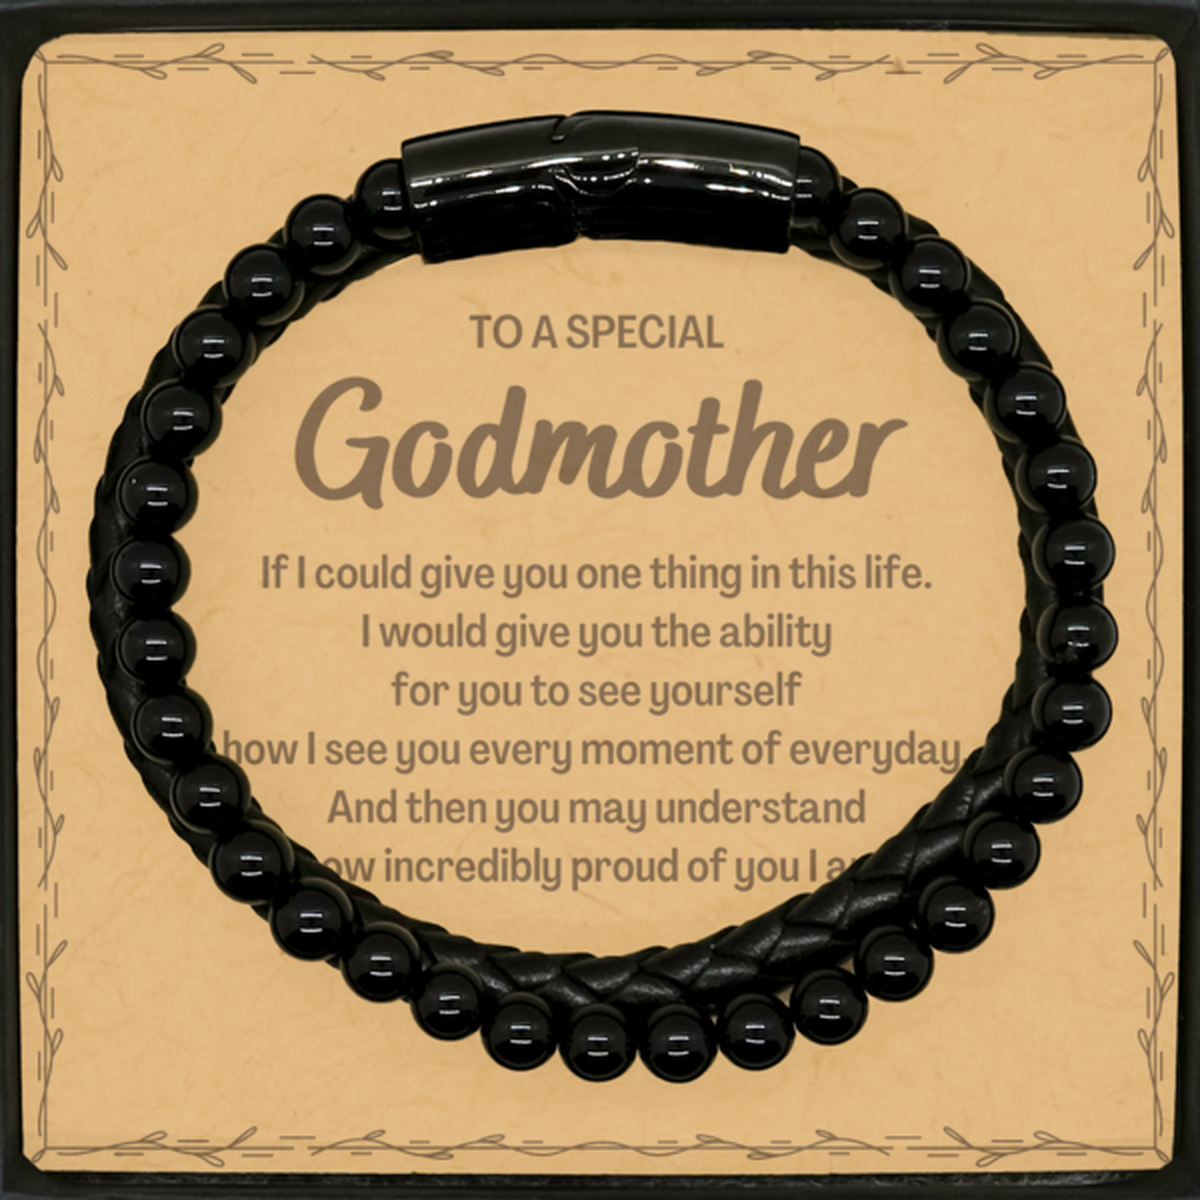 To My Godmother Stone Leather Bracelets, Gifts For Godmother Message Card, Inspirational Gifts for Christmas Birthday, Epic Gifts for Godmother To A Special Godmother how incredibly proud of you I am